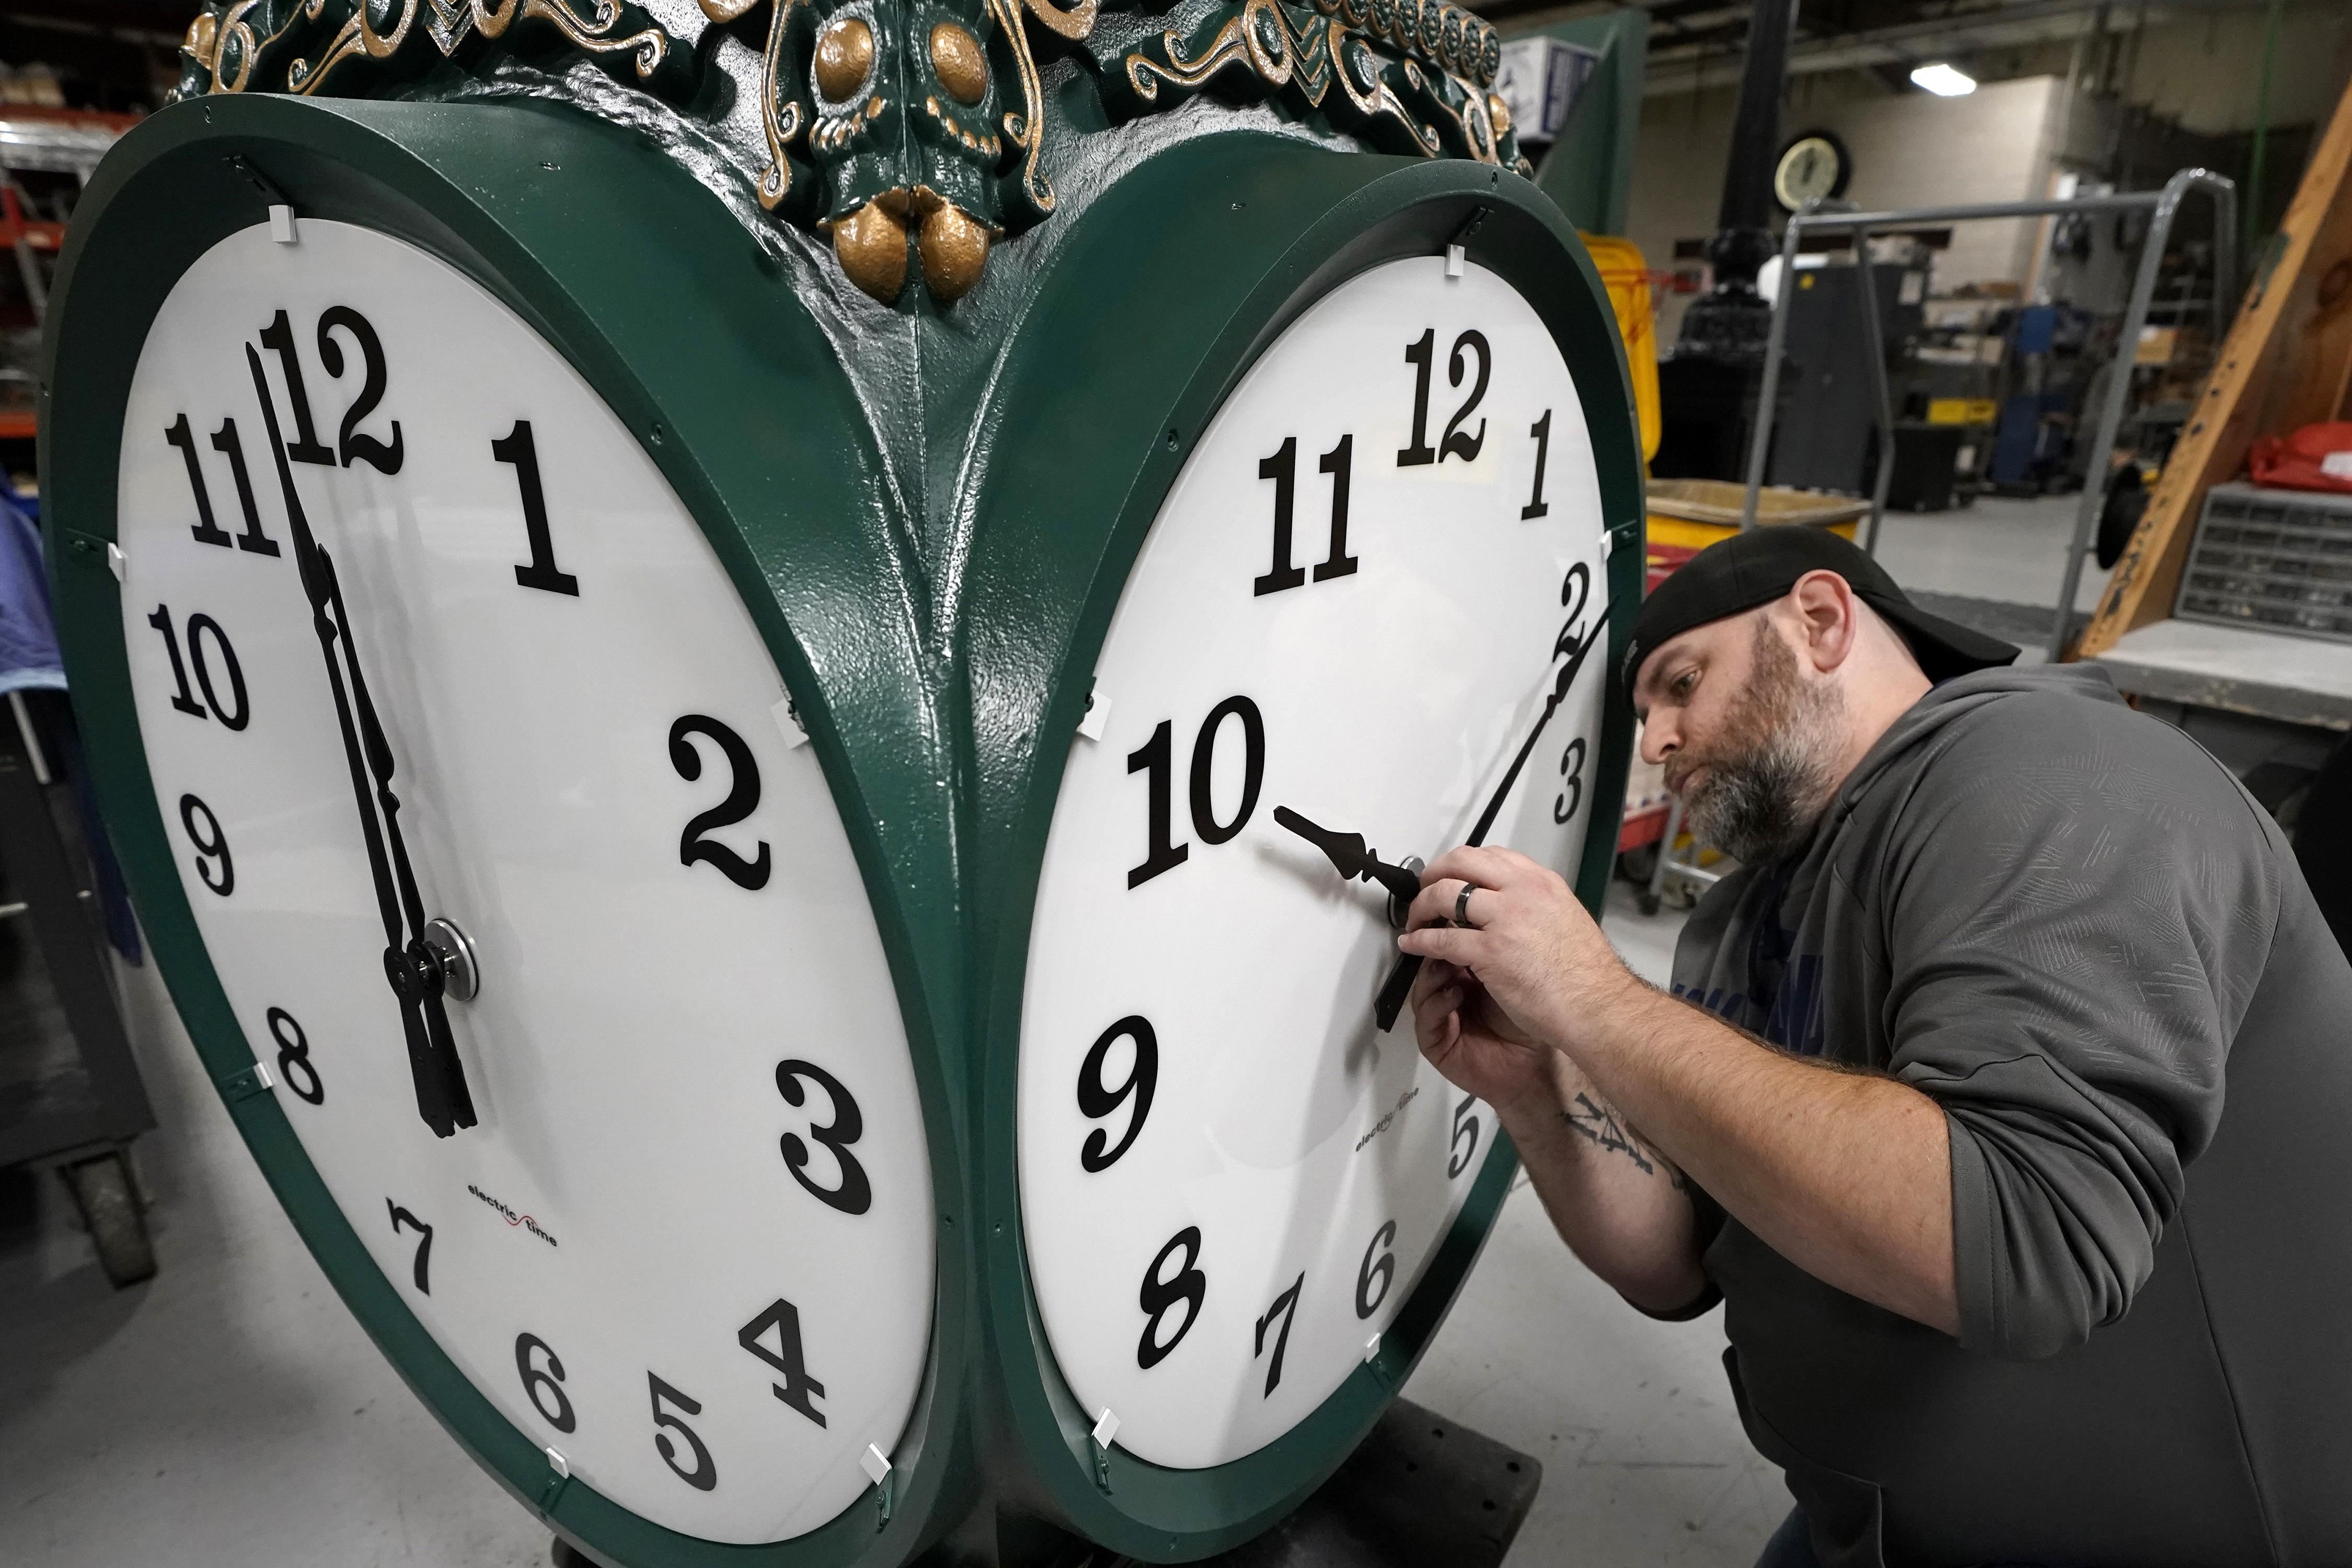 British Summer Time ends: When do the clocks change?